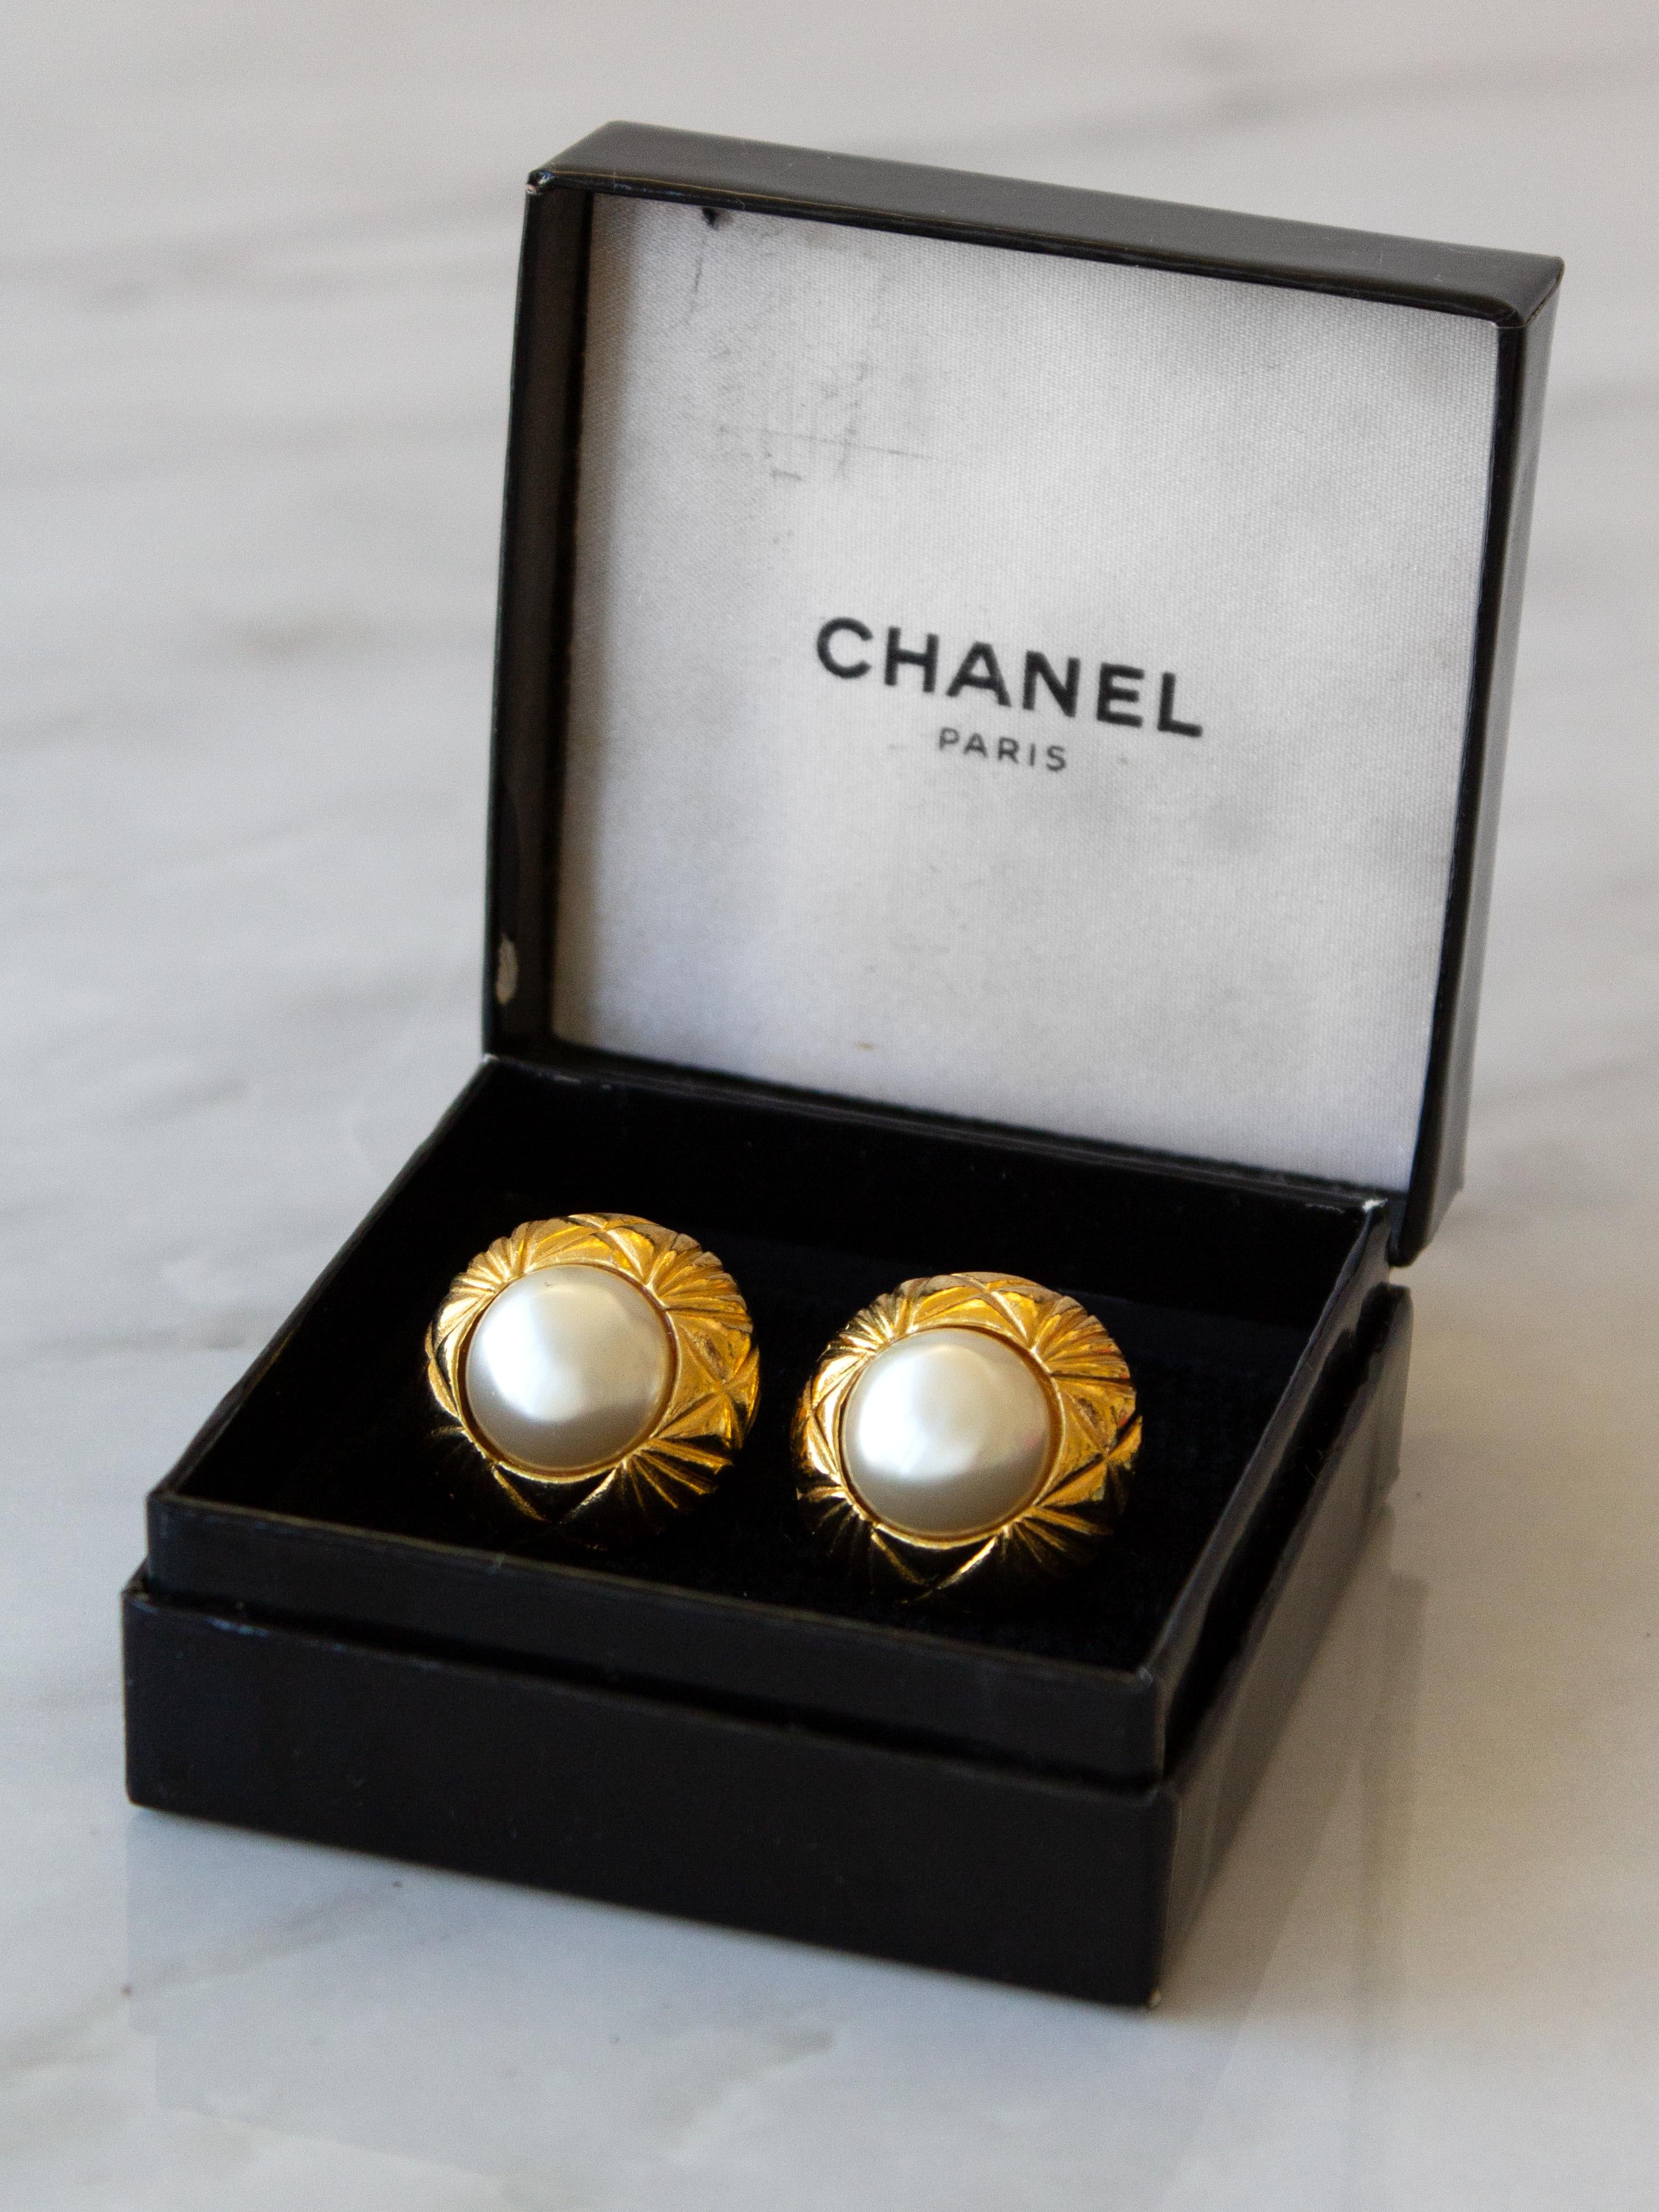 These timeless and classic vintage Chanel earrings from the 1970s are sure to add an exquisite touch to any outfit. Plated in 18k gold mixed with metal alloy, they sparkle in the light. The timeless quilted design of each piece gives off an air of